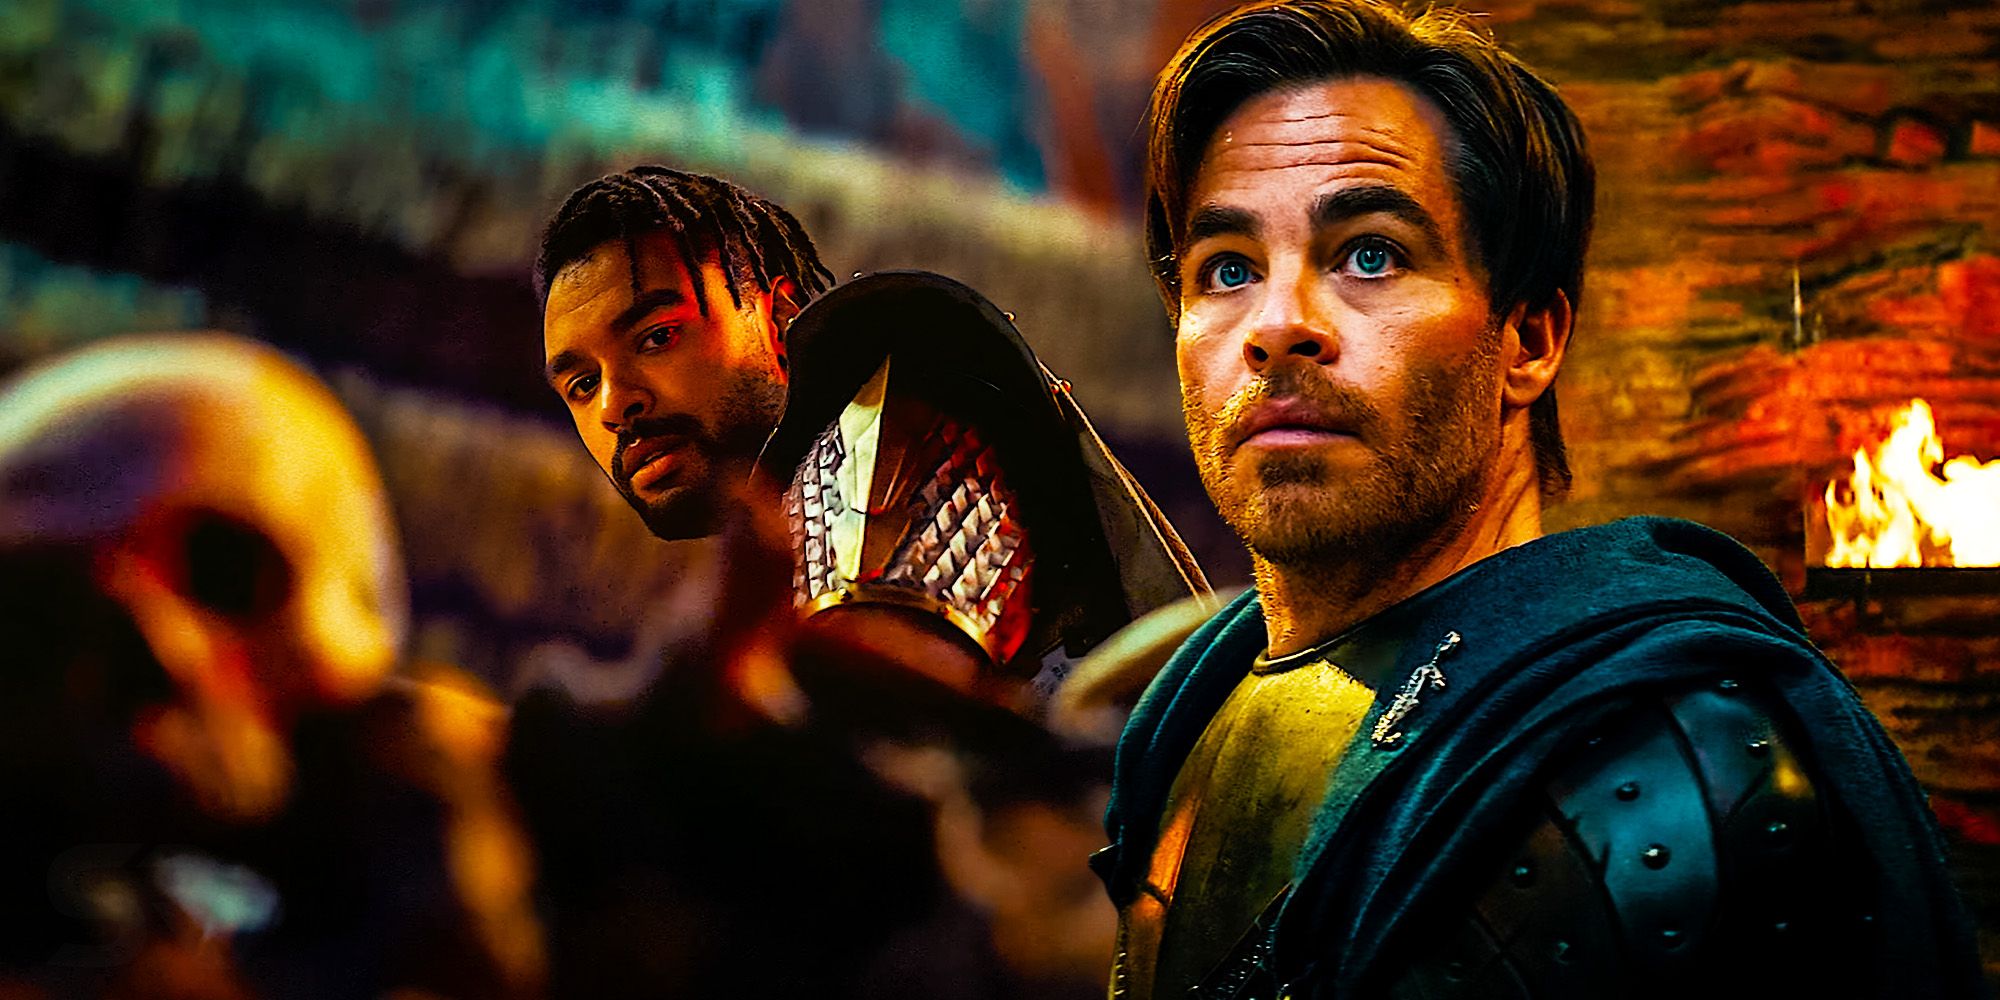 Chris Pine in a still from Dungeons & Dragons: Honor Among Thieves.